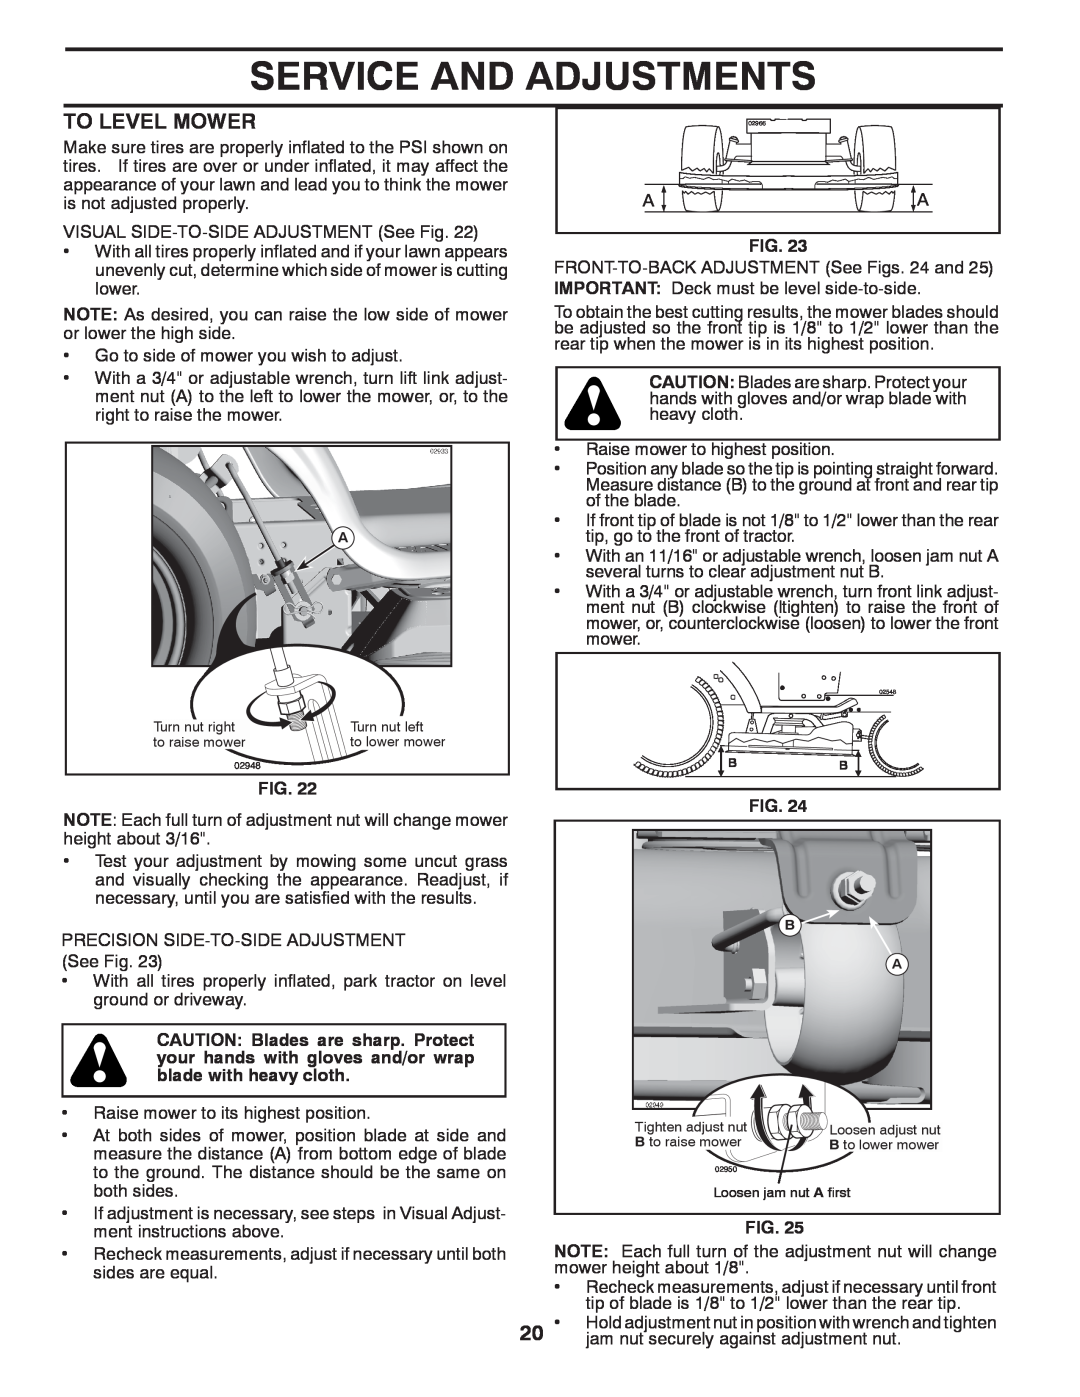 Poulan 418774, 96042006900 manual To Level Mower, Service And Adjustments, Turn nut right, Turn nut left, to raise mower 